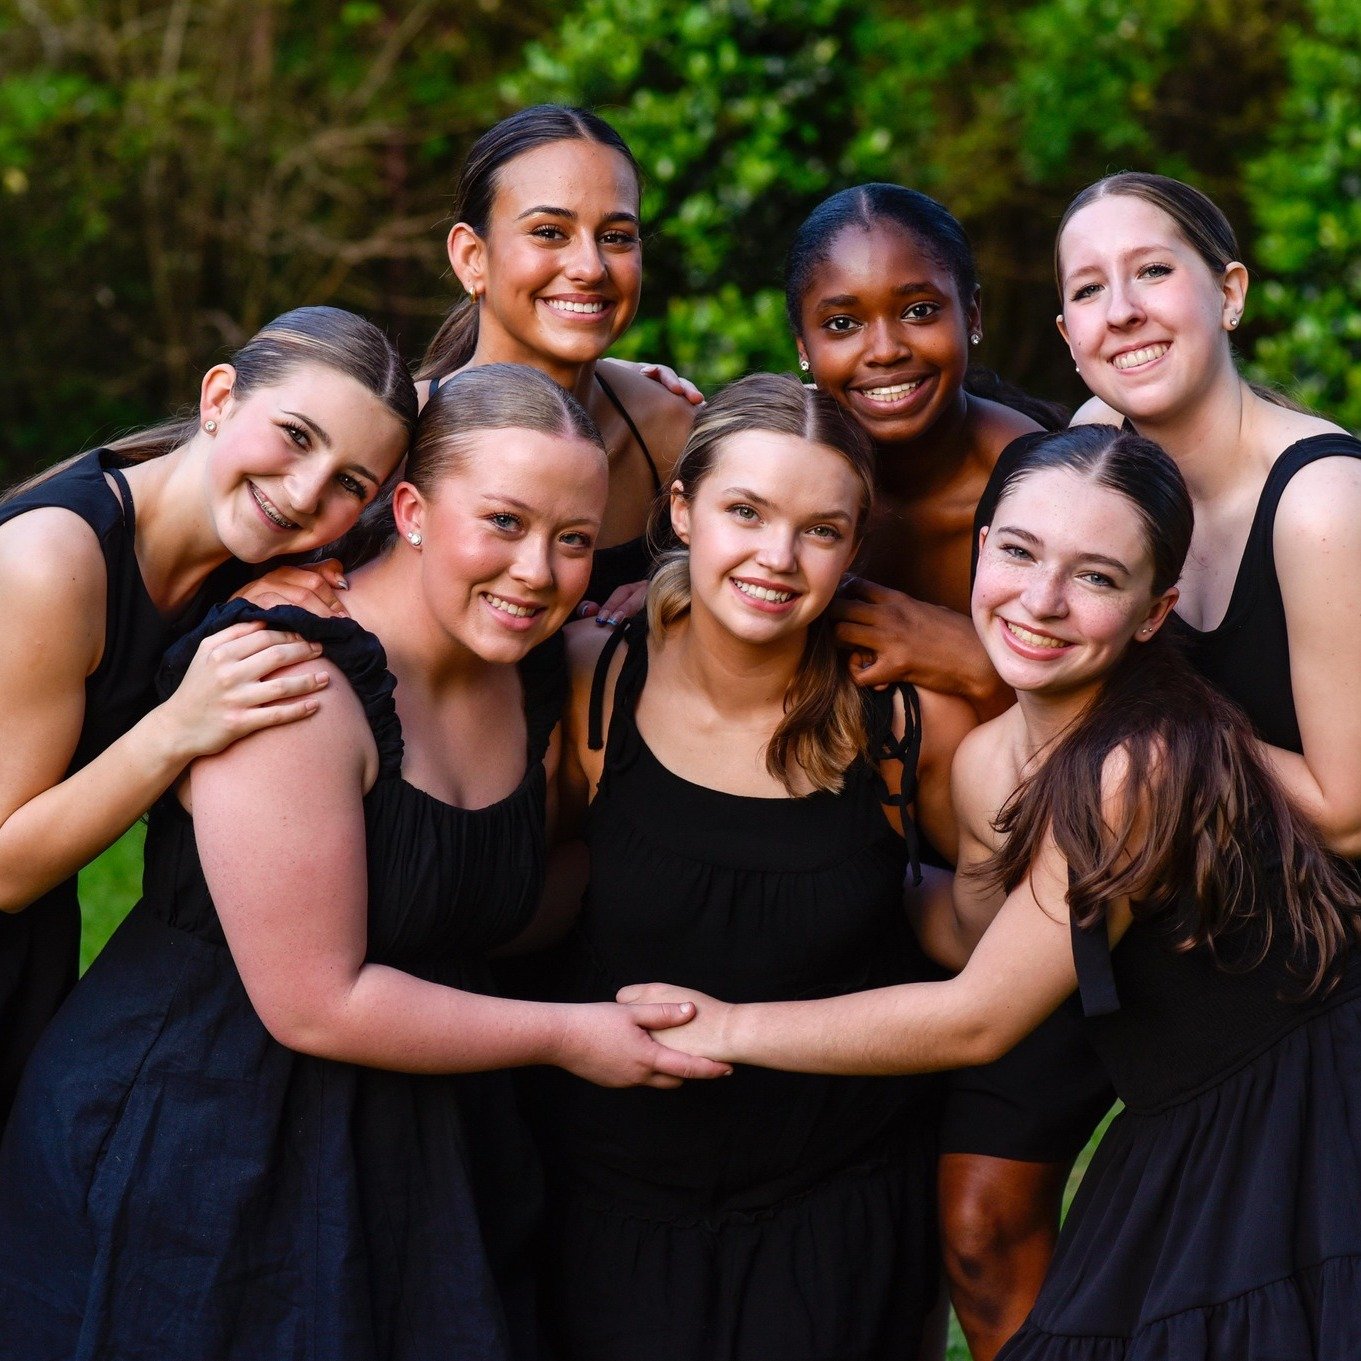 Our dance family means so much! #internationalfamilyday #dancetechandtalent